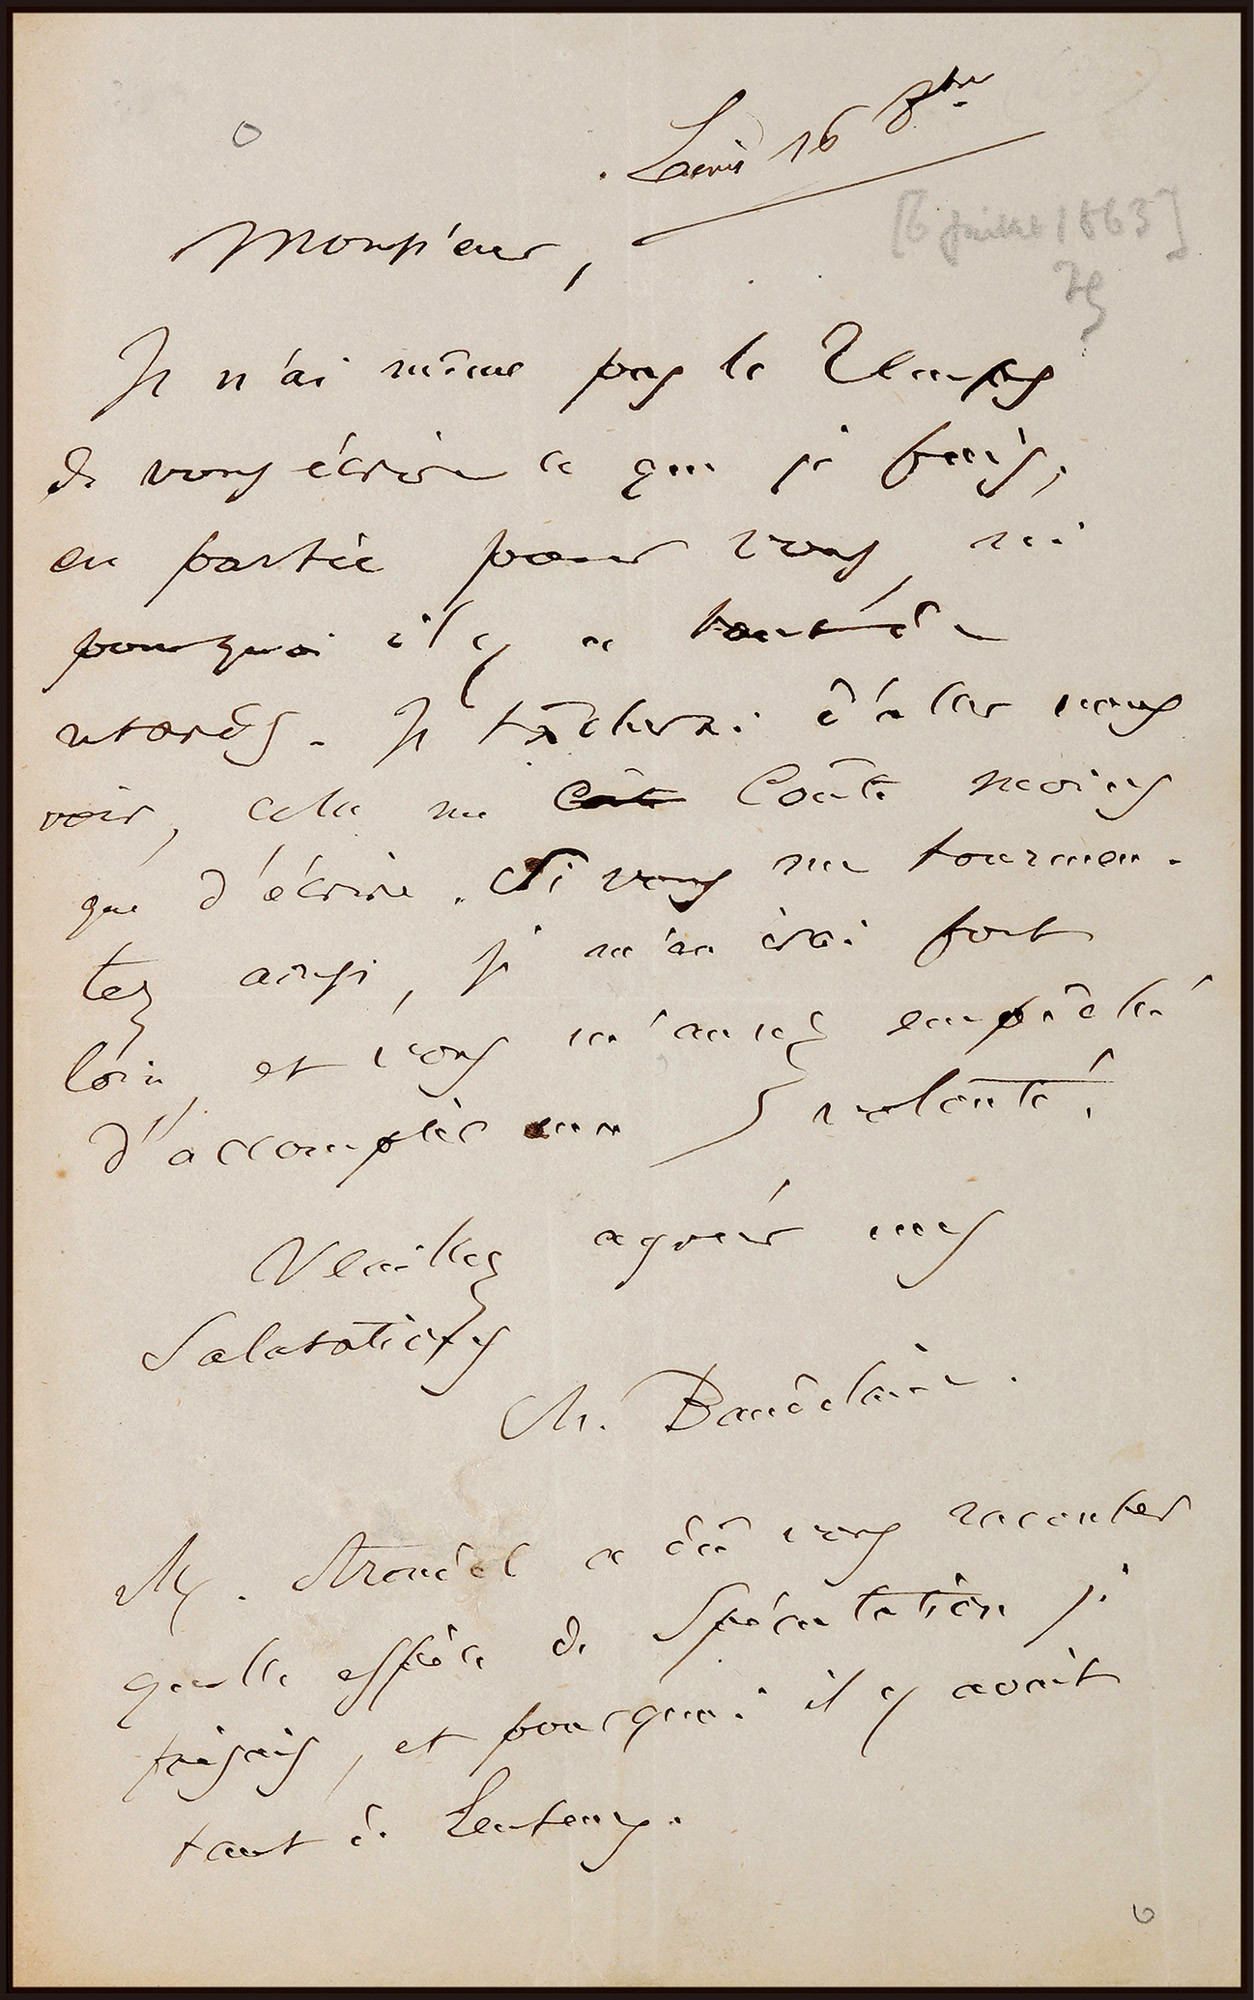 The letter concerning the plight of debt from Charles Baudelaire, the “pioneer of symbolic poetry”, in his own handwriting in his later years, with certificate